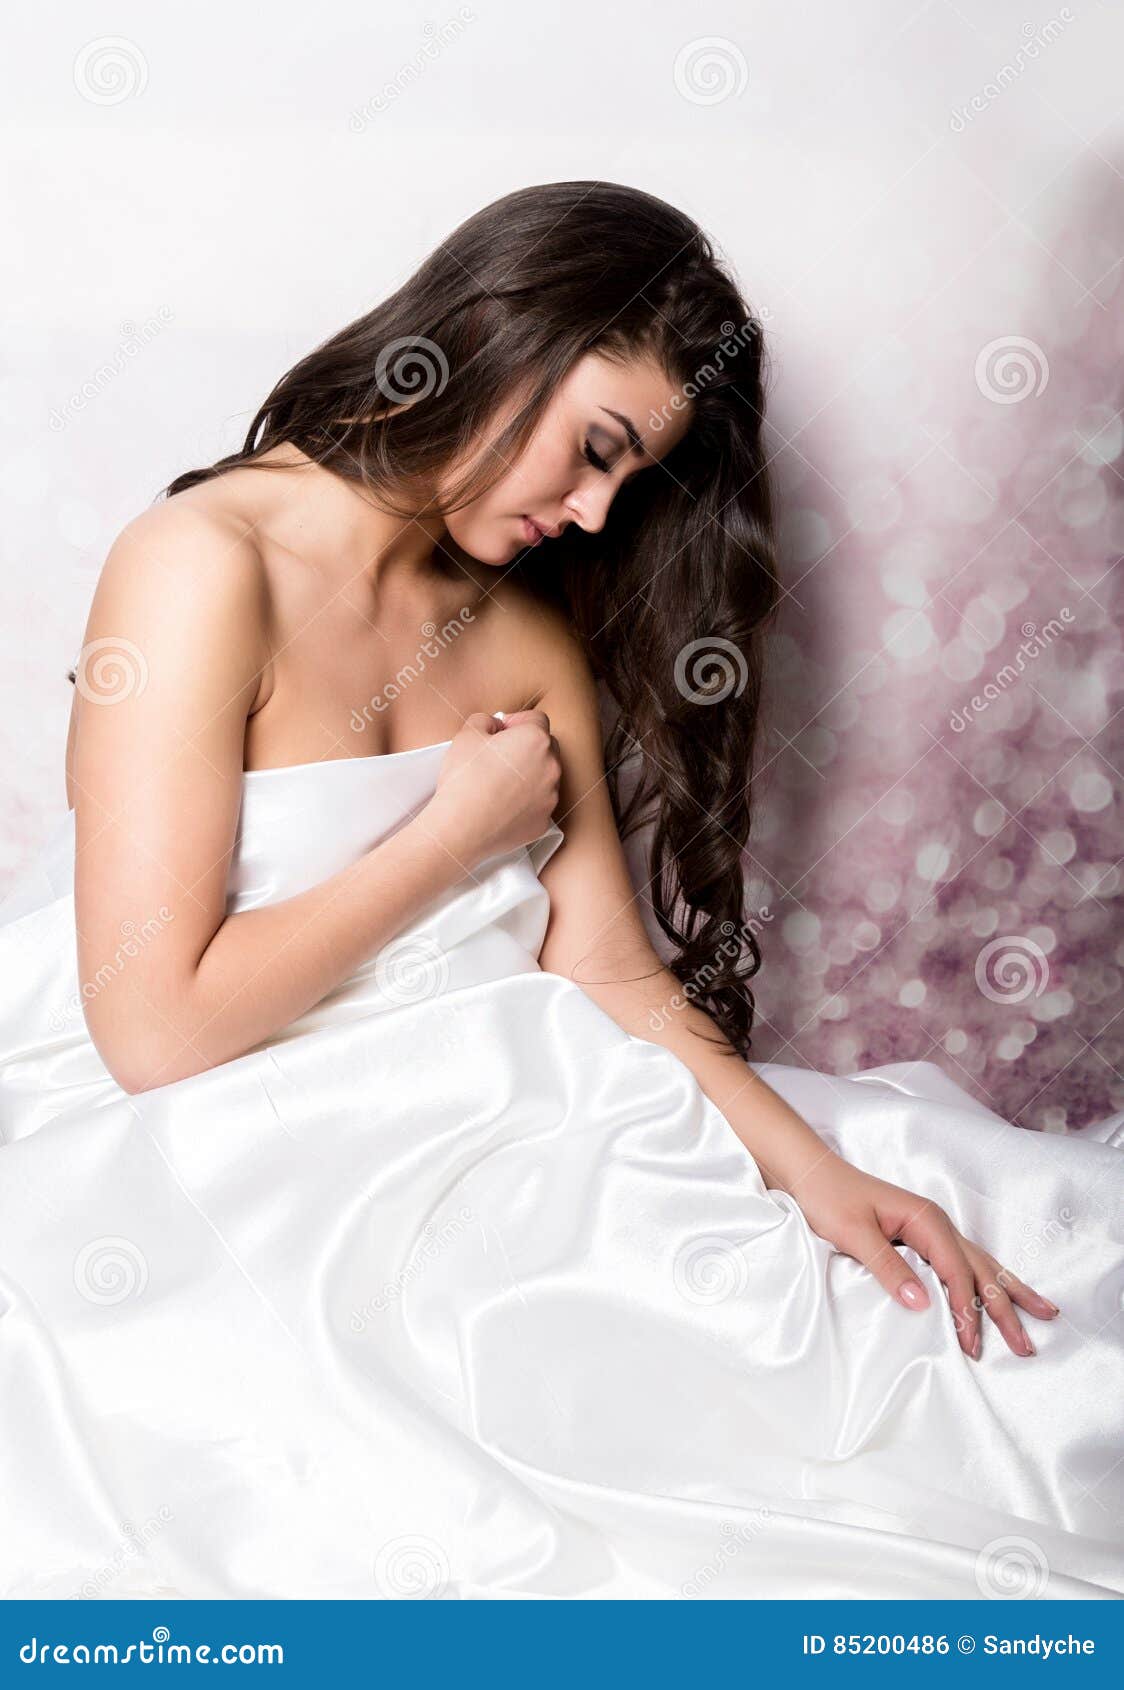 Pretty Female In Peignoir Sleeping On Bed Under Silk Sheets Stock Photo